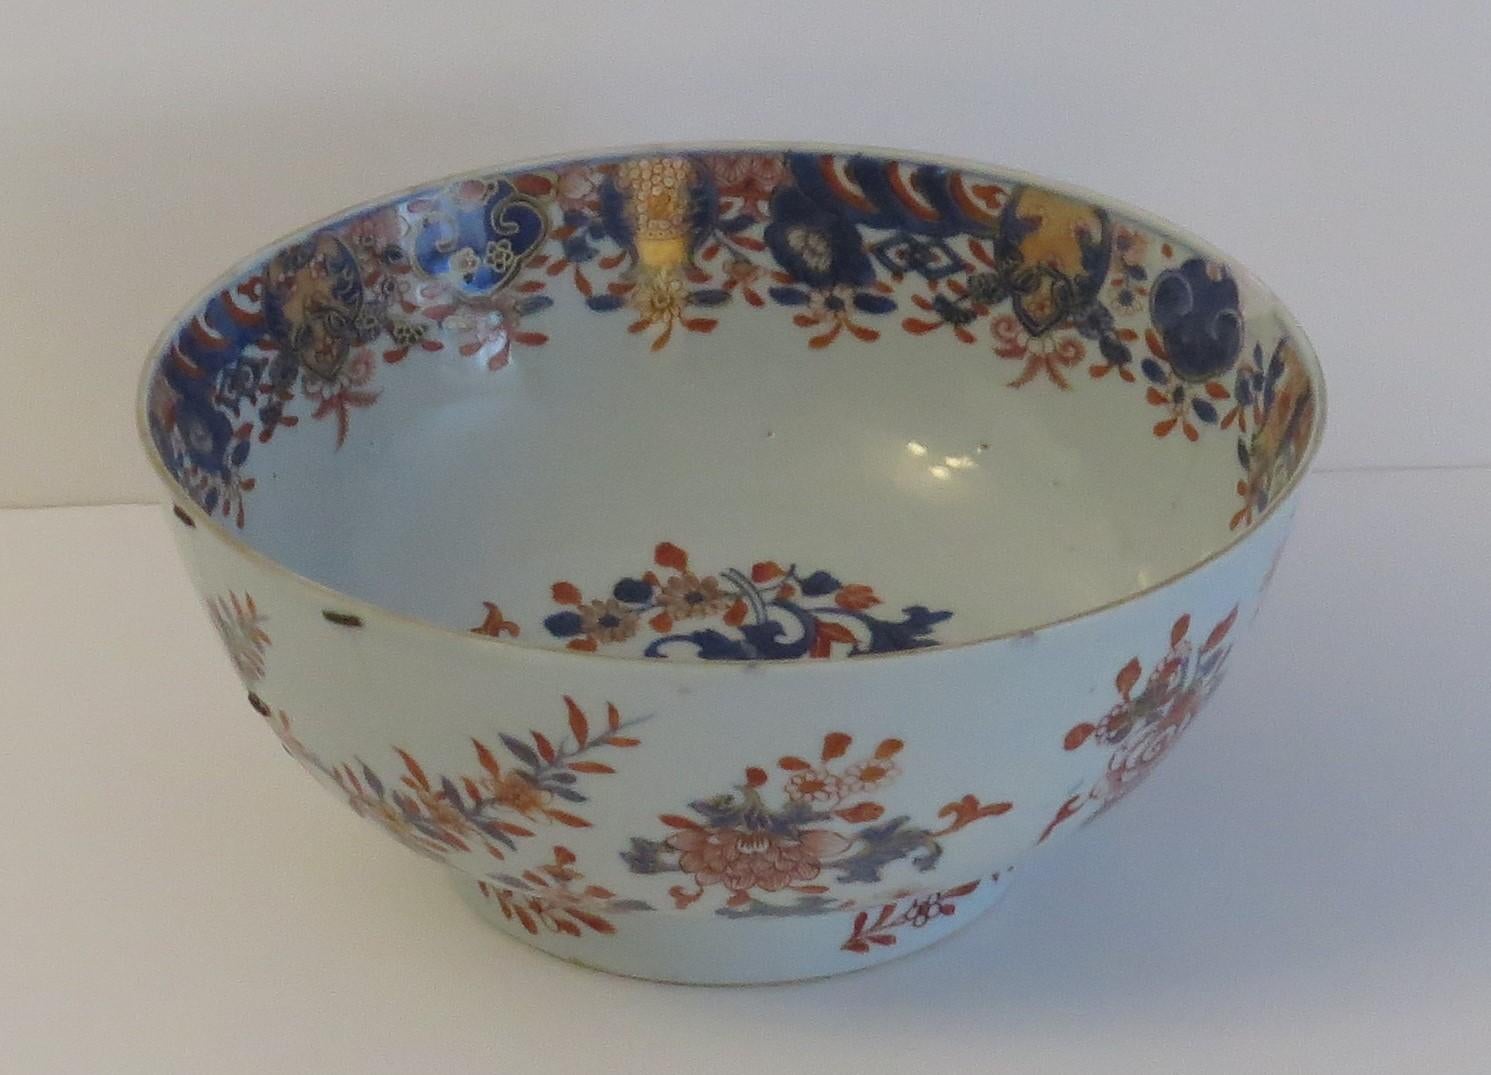 This is a beautiful Chinese Export porcelain footed Bowl with fine Imari hand painted decoration, which we date to the turn of the 17th to 18th century, circa 1710, Qing period, Kangxi (1662 - 1722) reign. 

This bowl is well potted on a fairly high